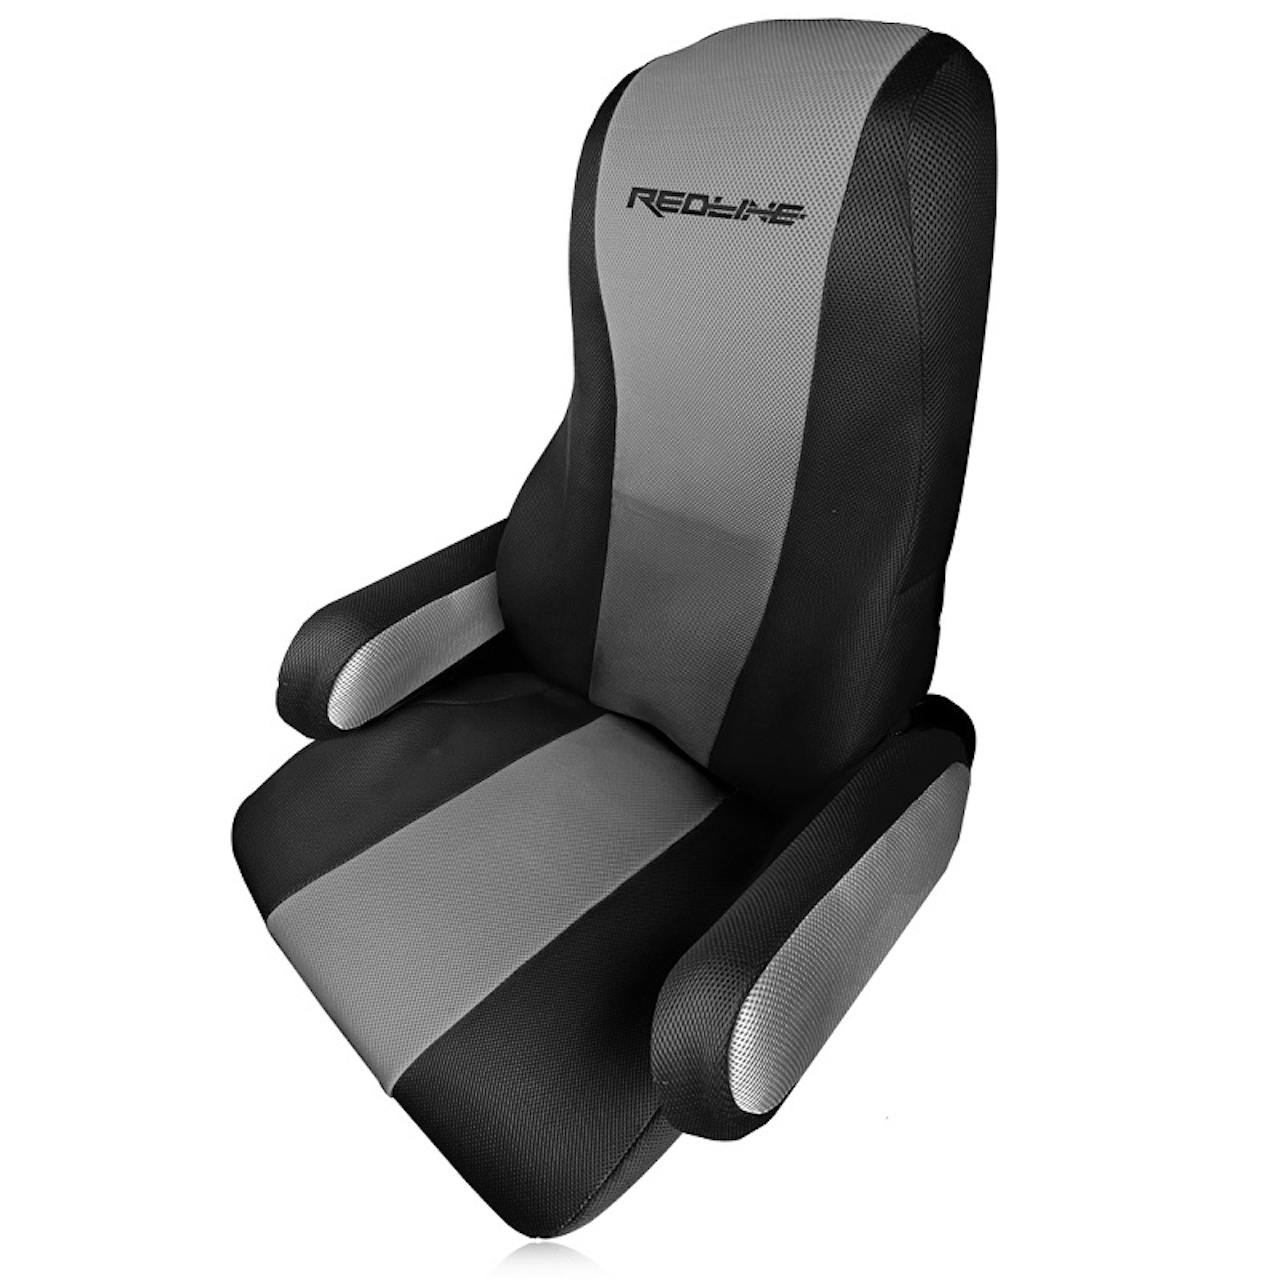 https://raneys-cdn11.imgix.net/images/stencil/original/products/203089/156978/Freightliner_Cascadia_Seat_Cover_Grey_Black__93195.1609348728.jpg?auto=compress,format&w=1280